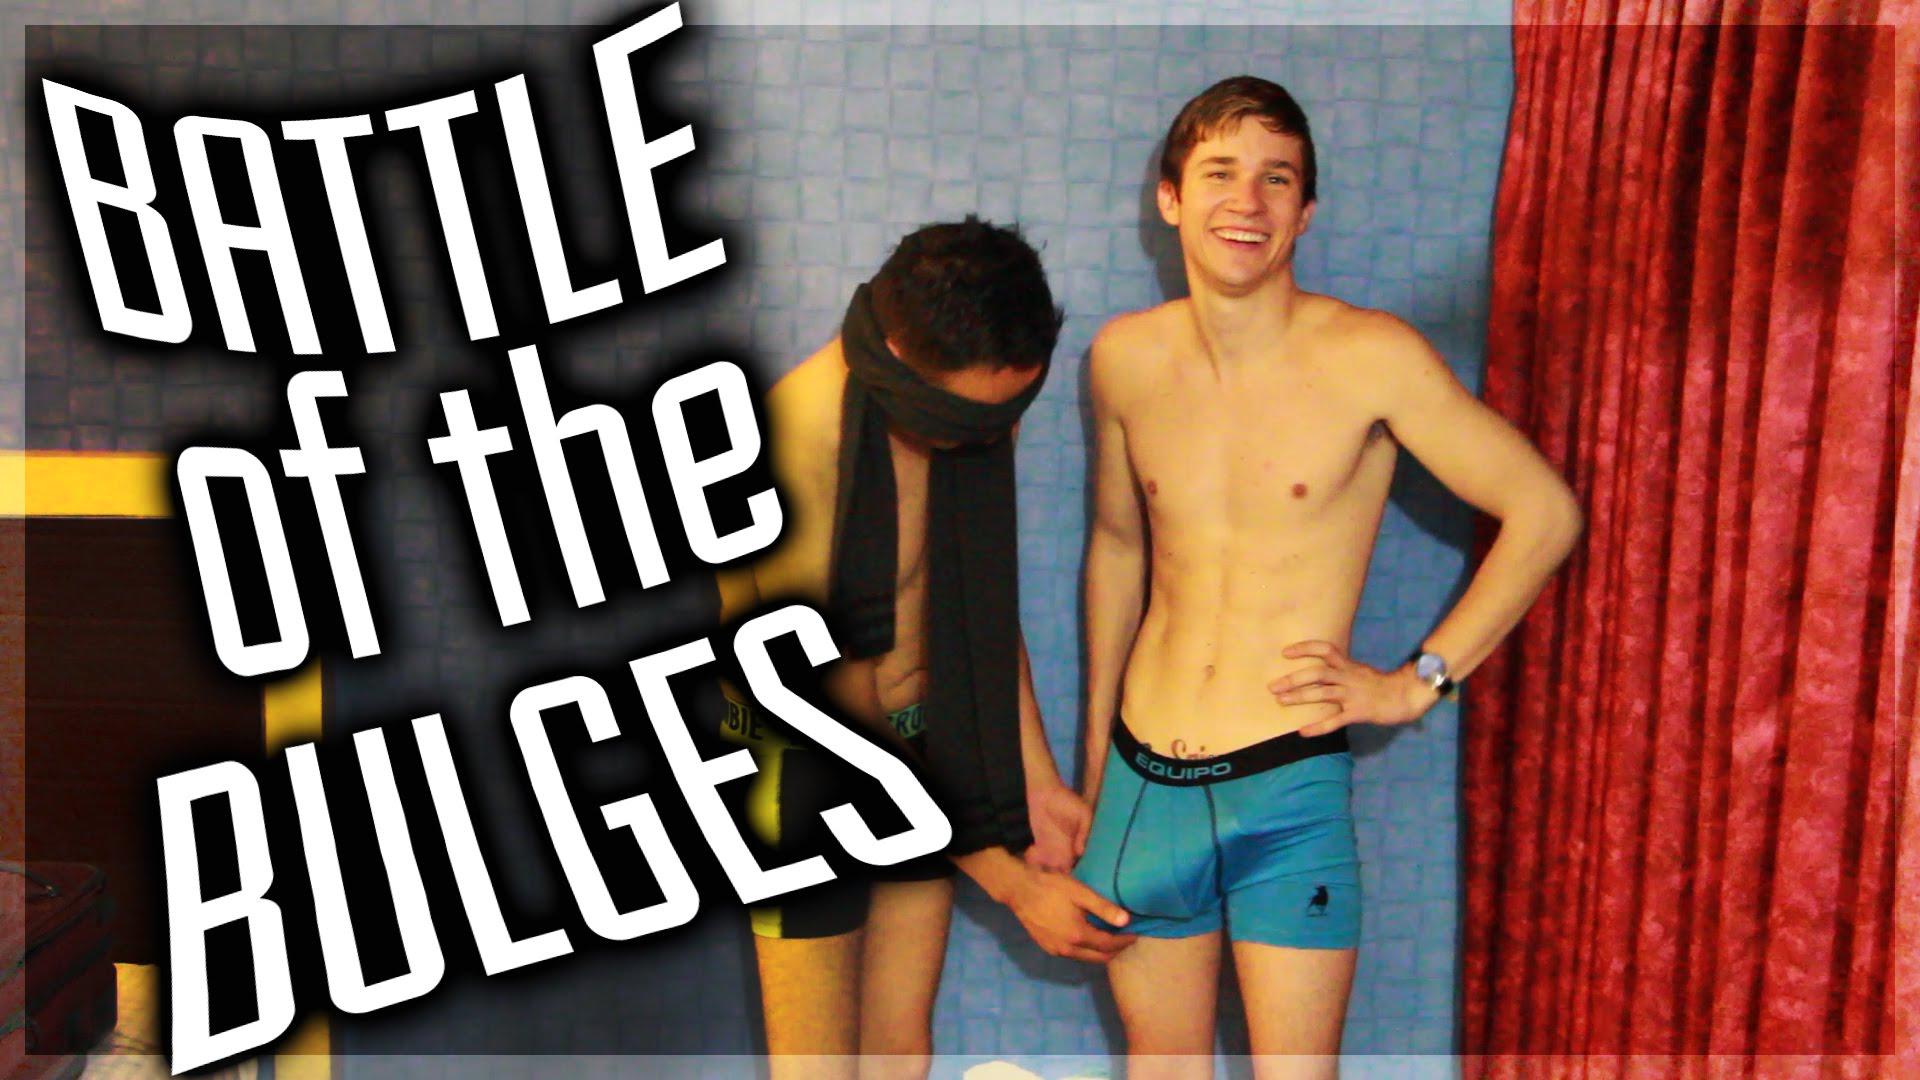 Donnie Martin on X: BATTLE OF THE BULGES (ft. Donnie Martin) on